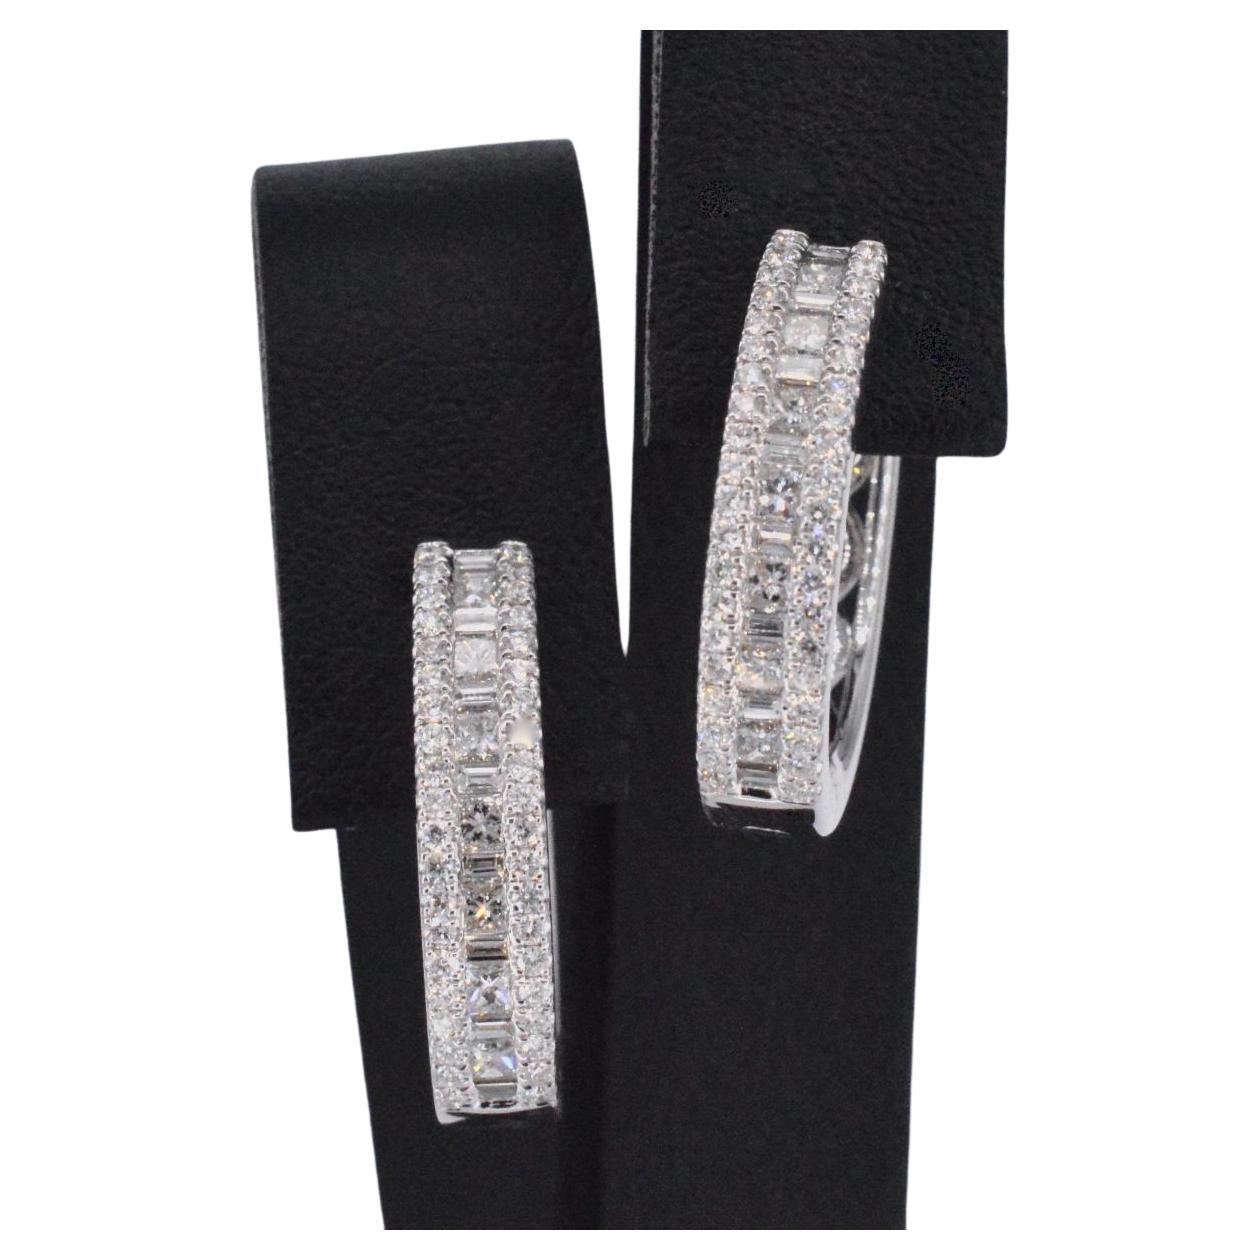 White Gold Earrings with Brilliant, Princess and Baguette Diamonds